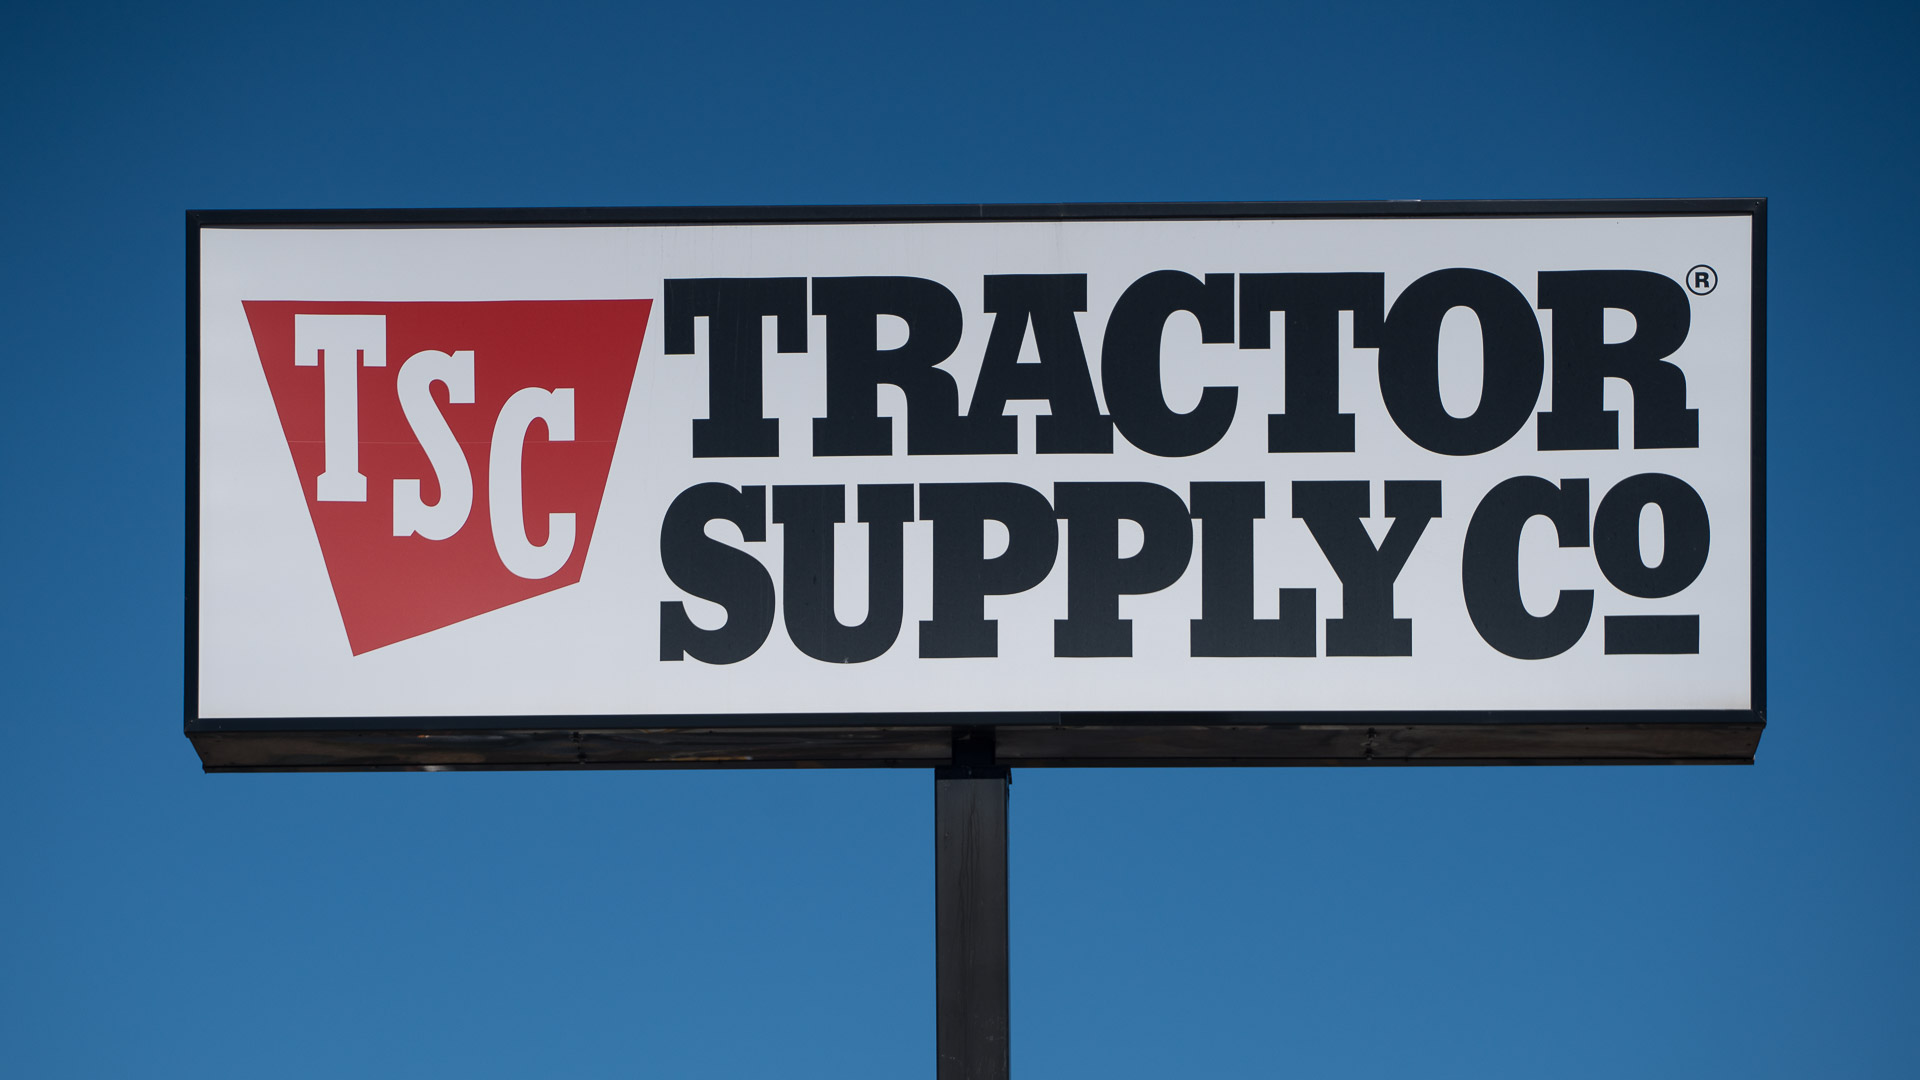 Tractor Supply Co In Dodge City Ks Luminous Neon Art And Sign Systems Kansas And Missouri